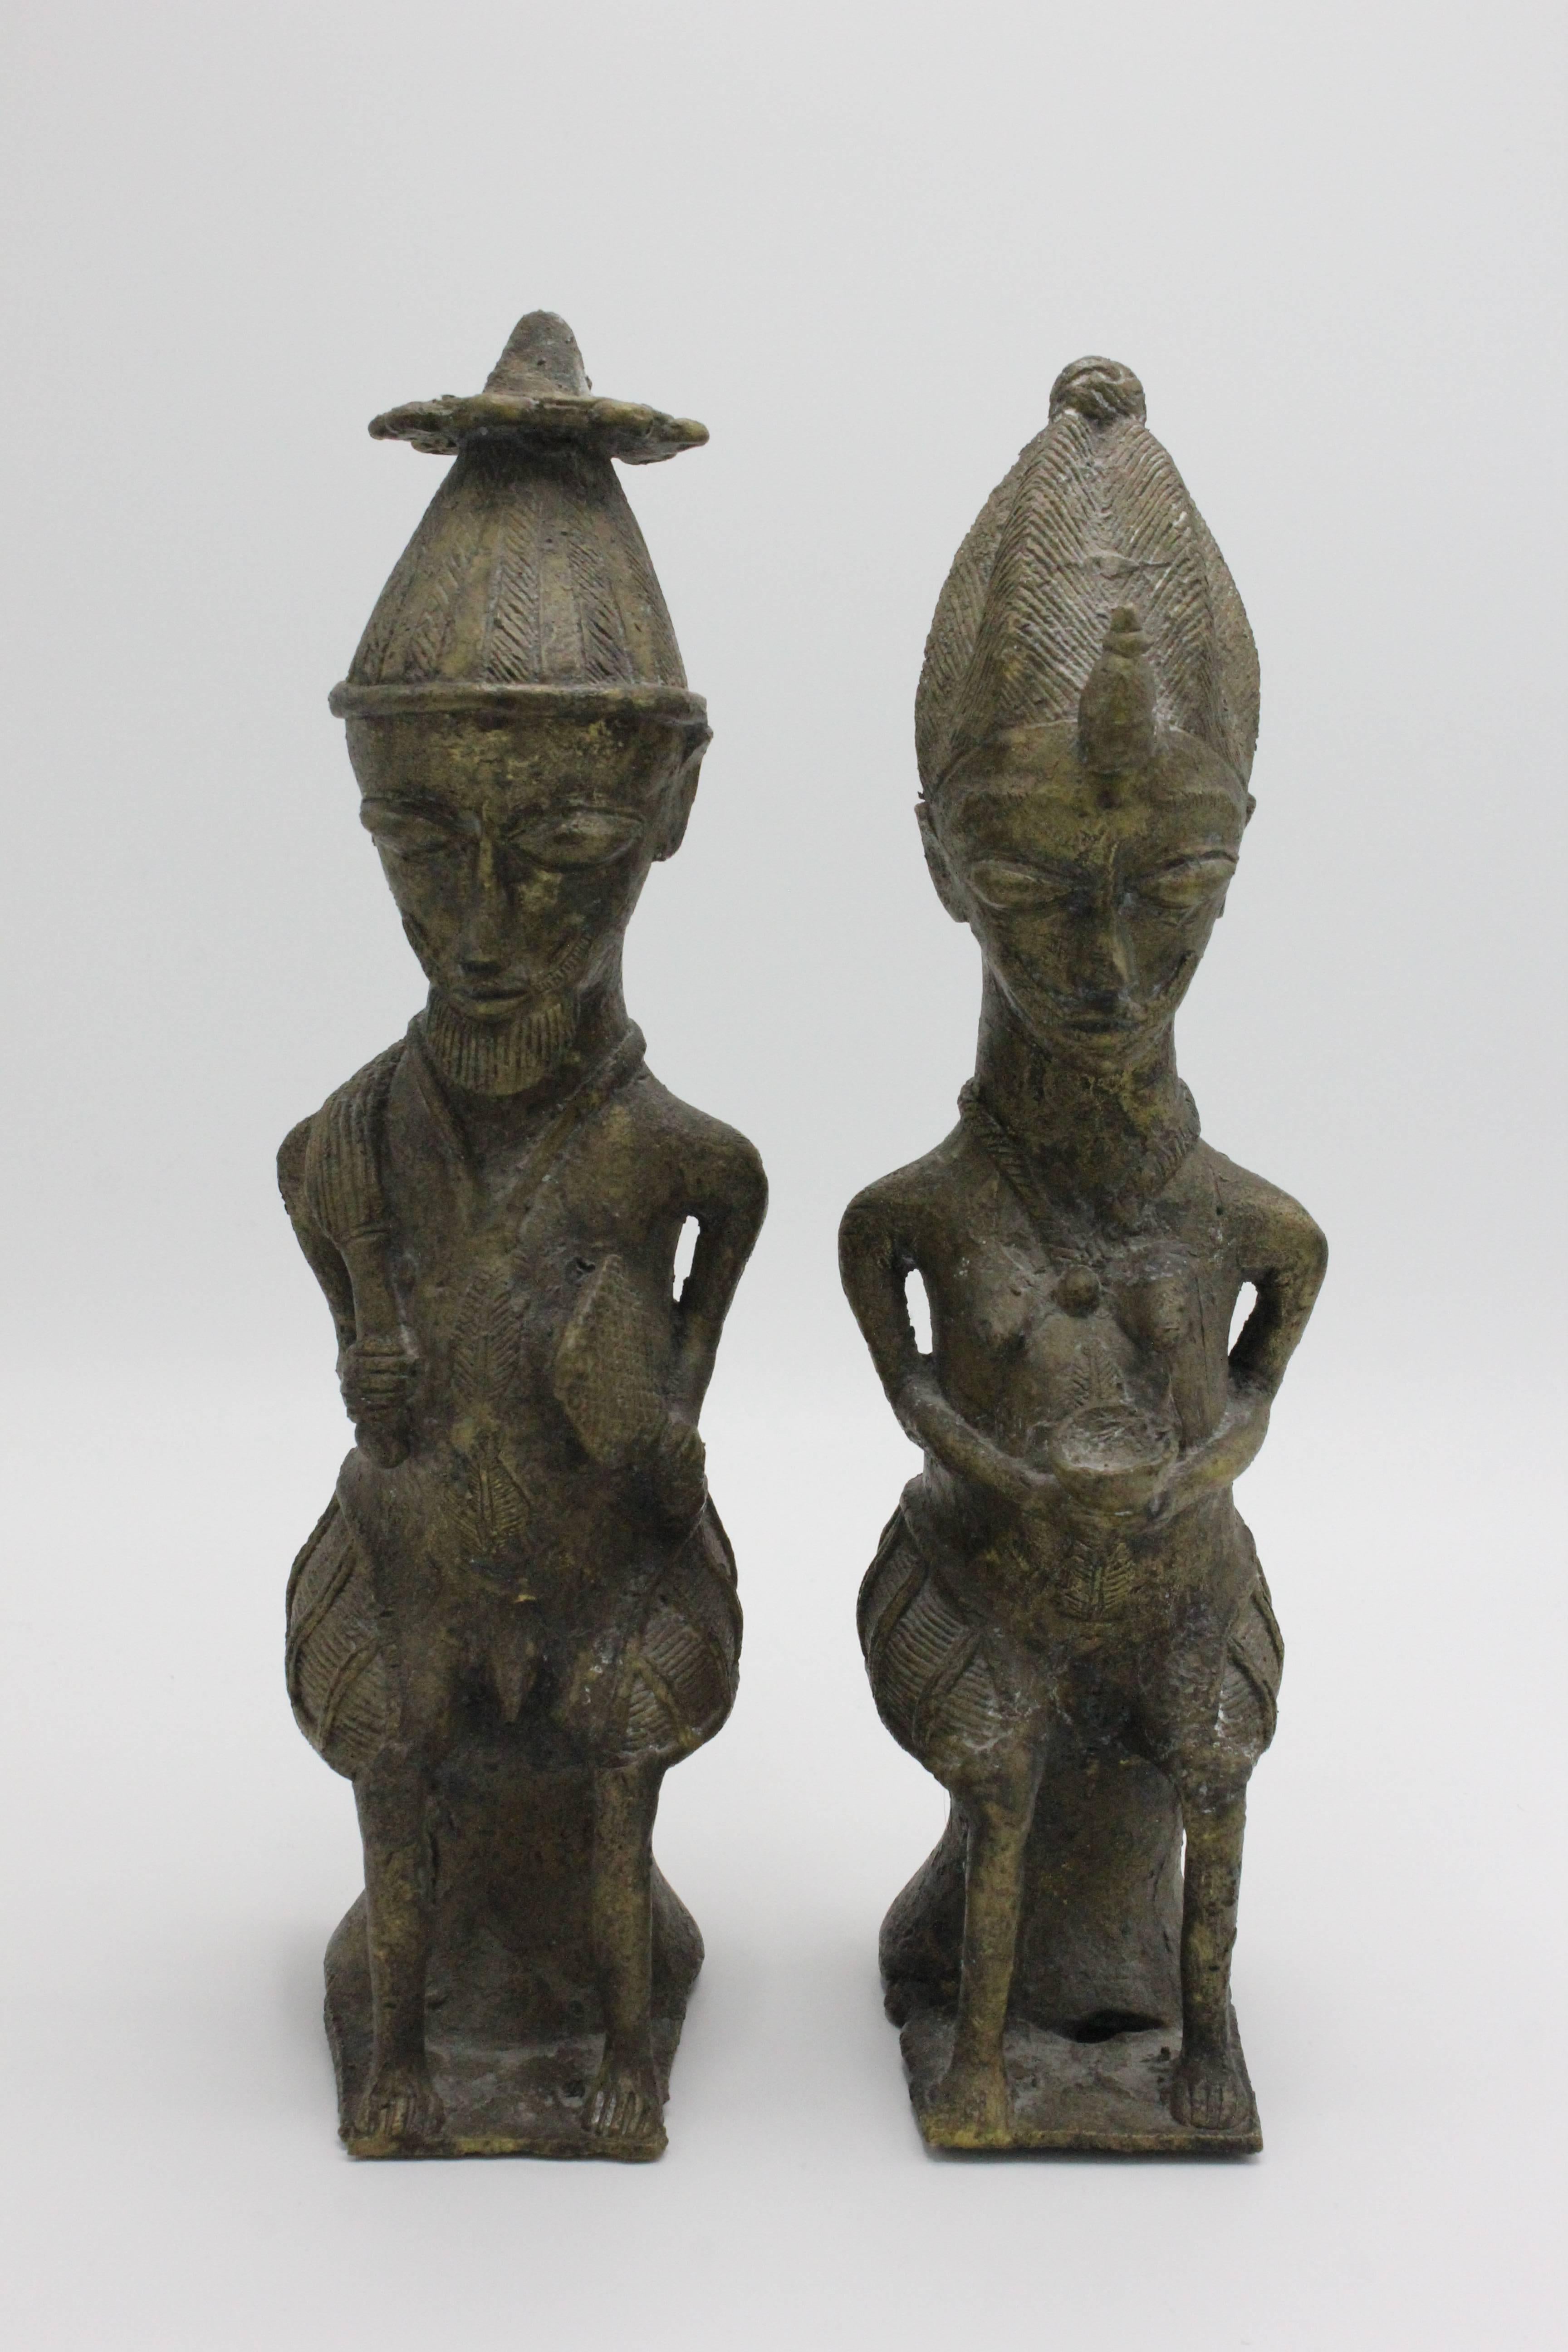 Pair of Yoruba cast brass figures for the Ogboni cult, Nigeria. The male and female pair are holding ritual pieces and are a recurring symbol of Ogboni culture. The figures symbolize the founding couple and guardians of ancient Ogboni laws.